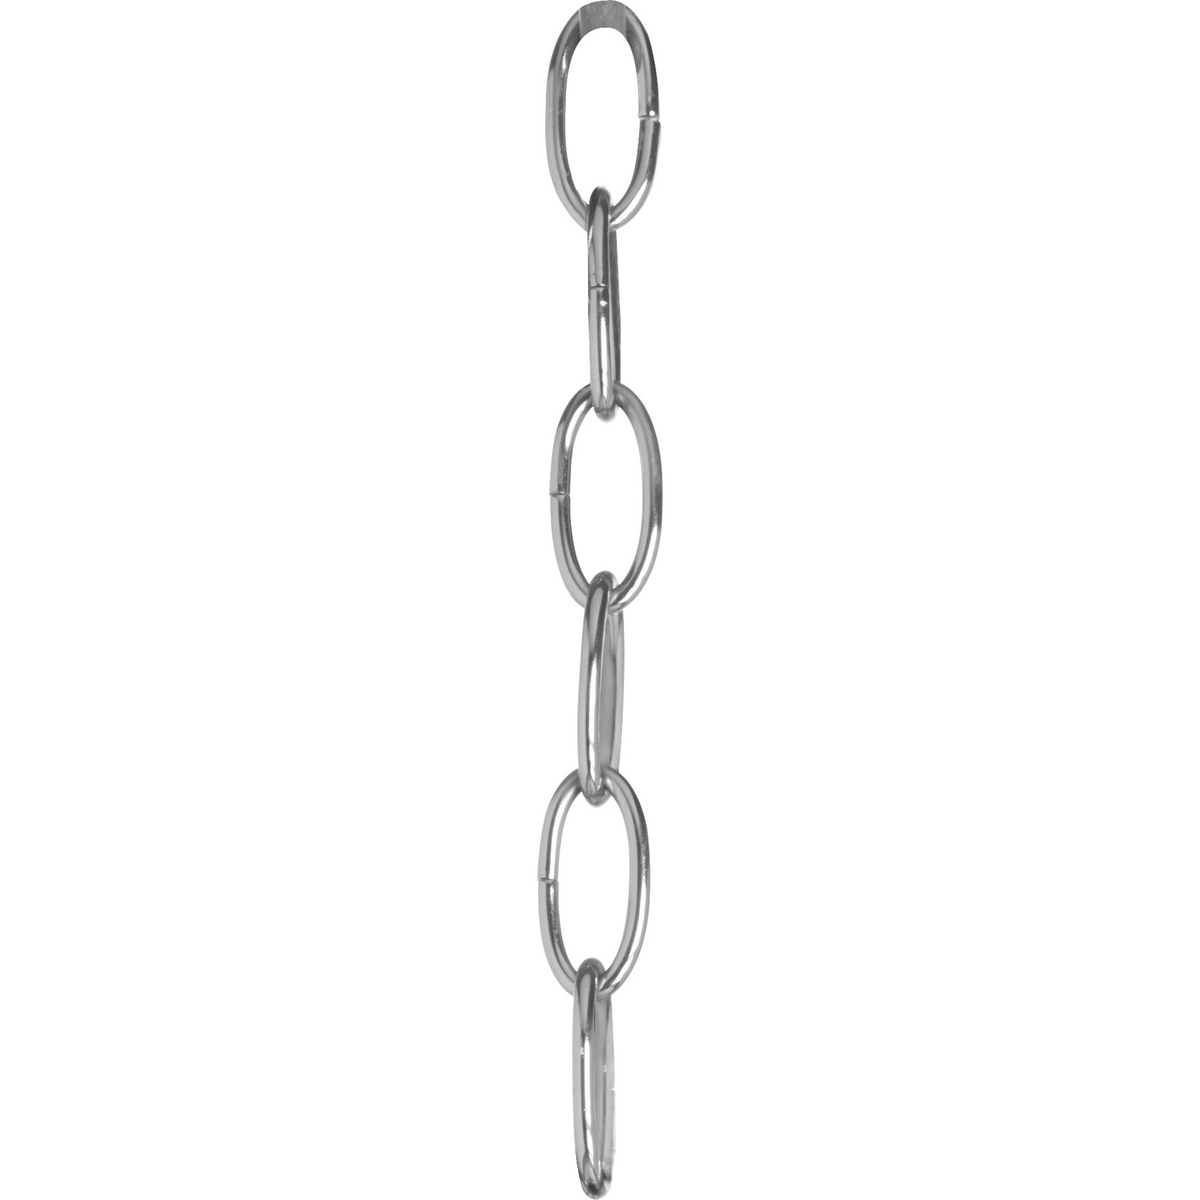 Ten feet of 9 gauge chain in Polished Chrome finish. Solid chain permits installation of chain-hung fixtures on high ceilings. Maximum fixture weight 50 lbs.